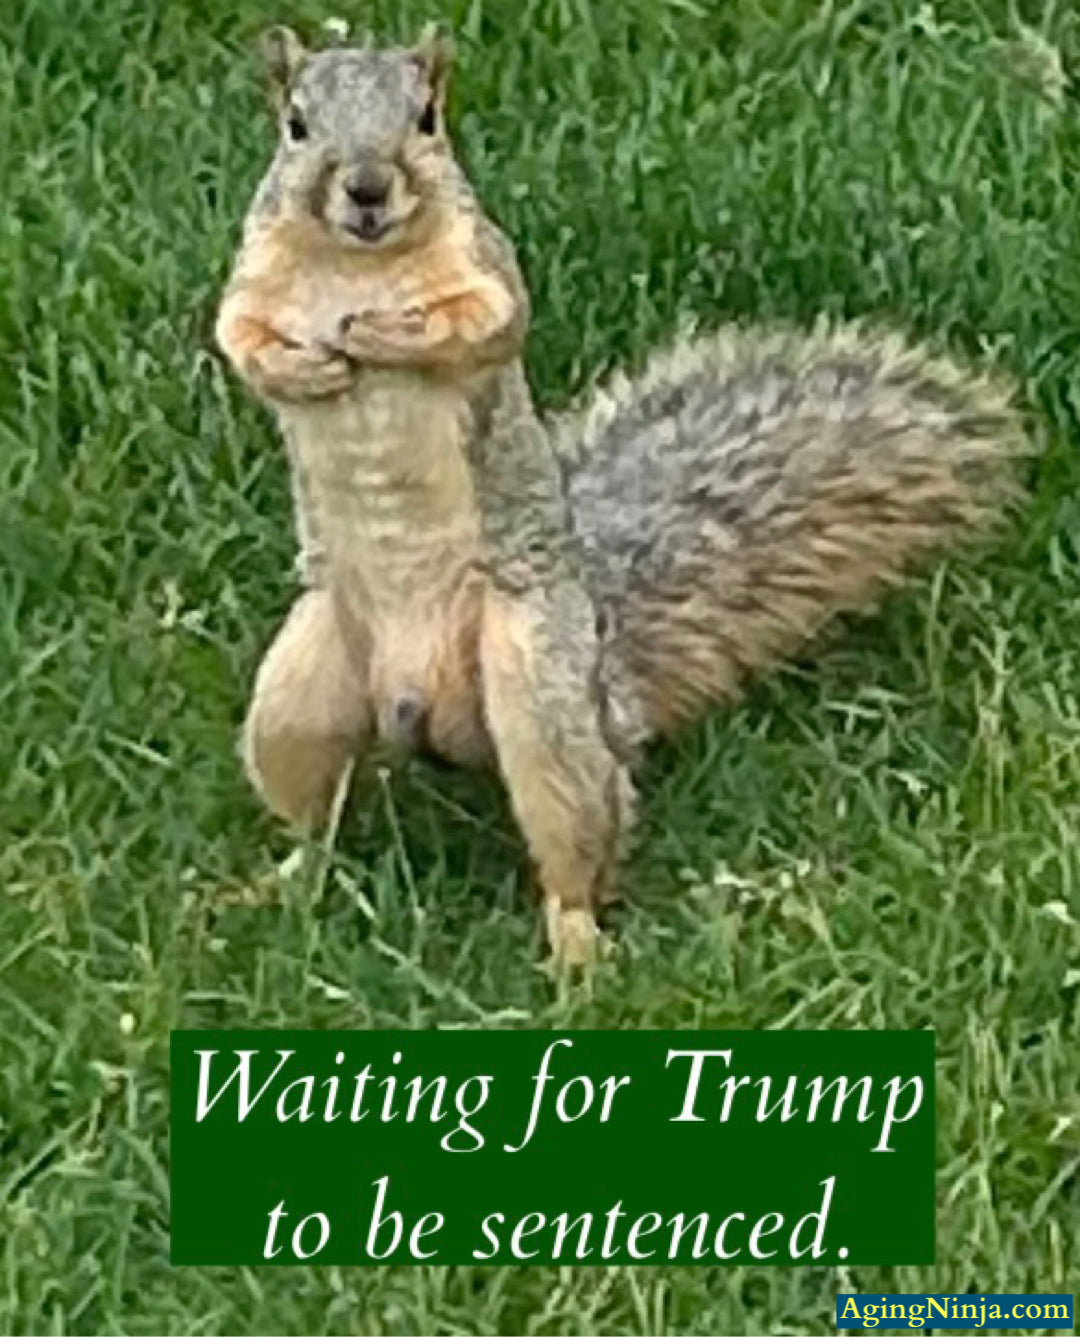 Waiting for Trump to be sentenced be like: